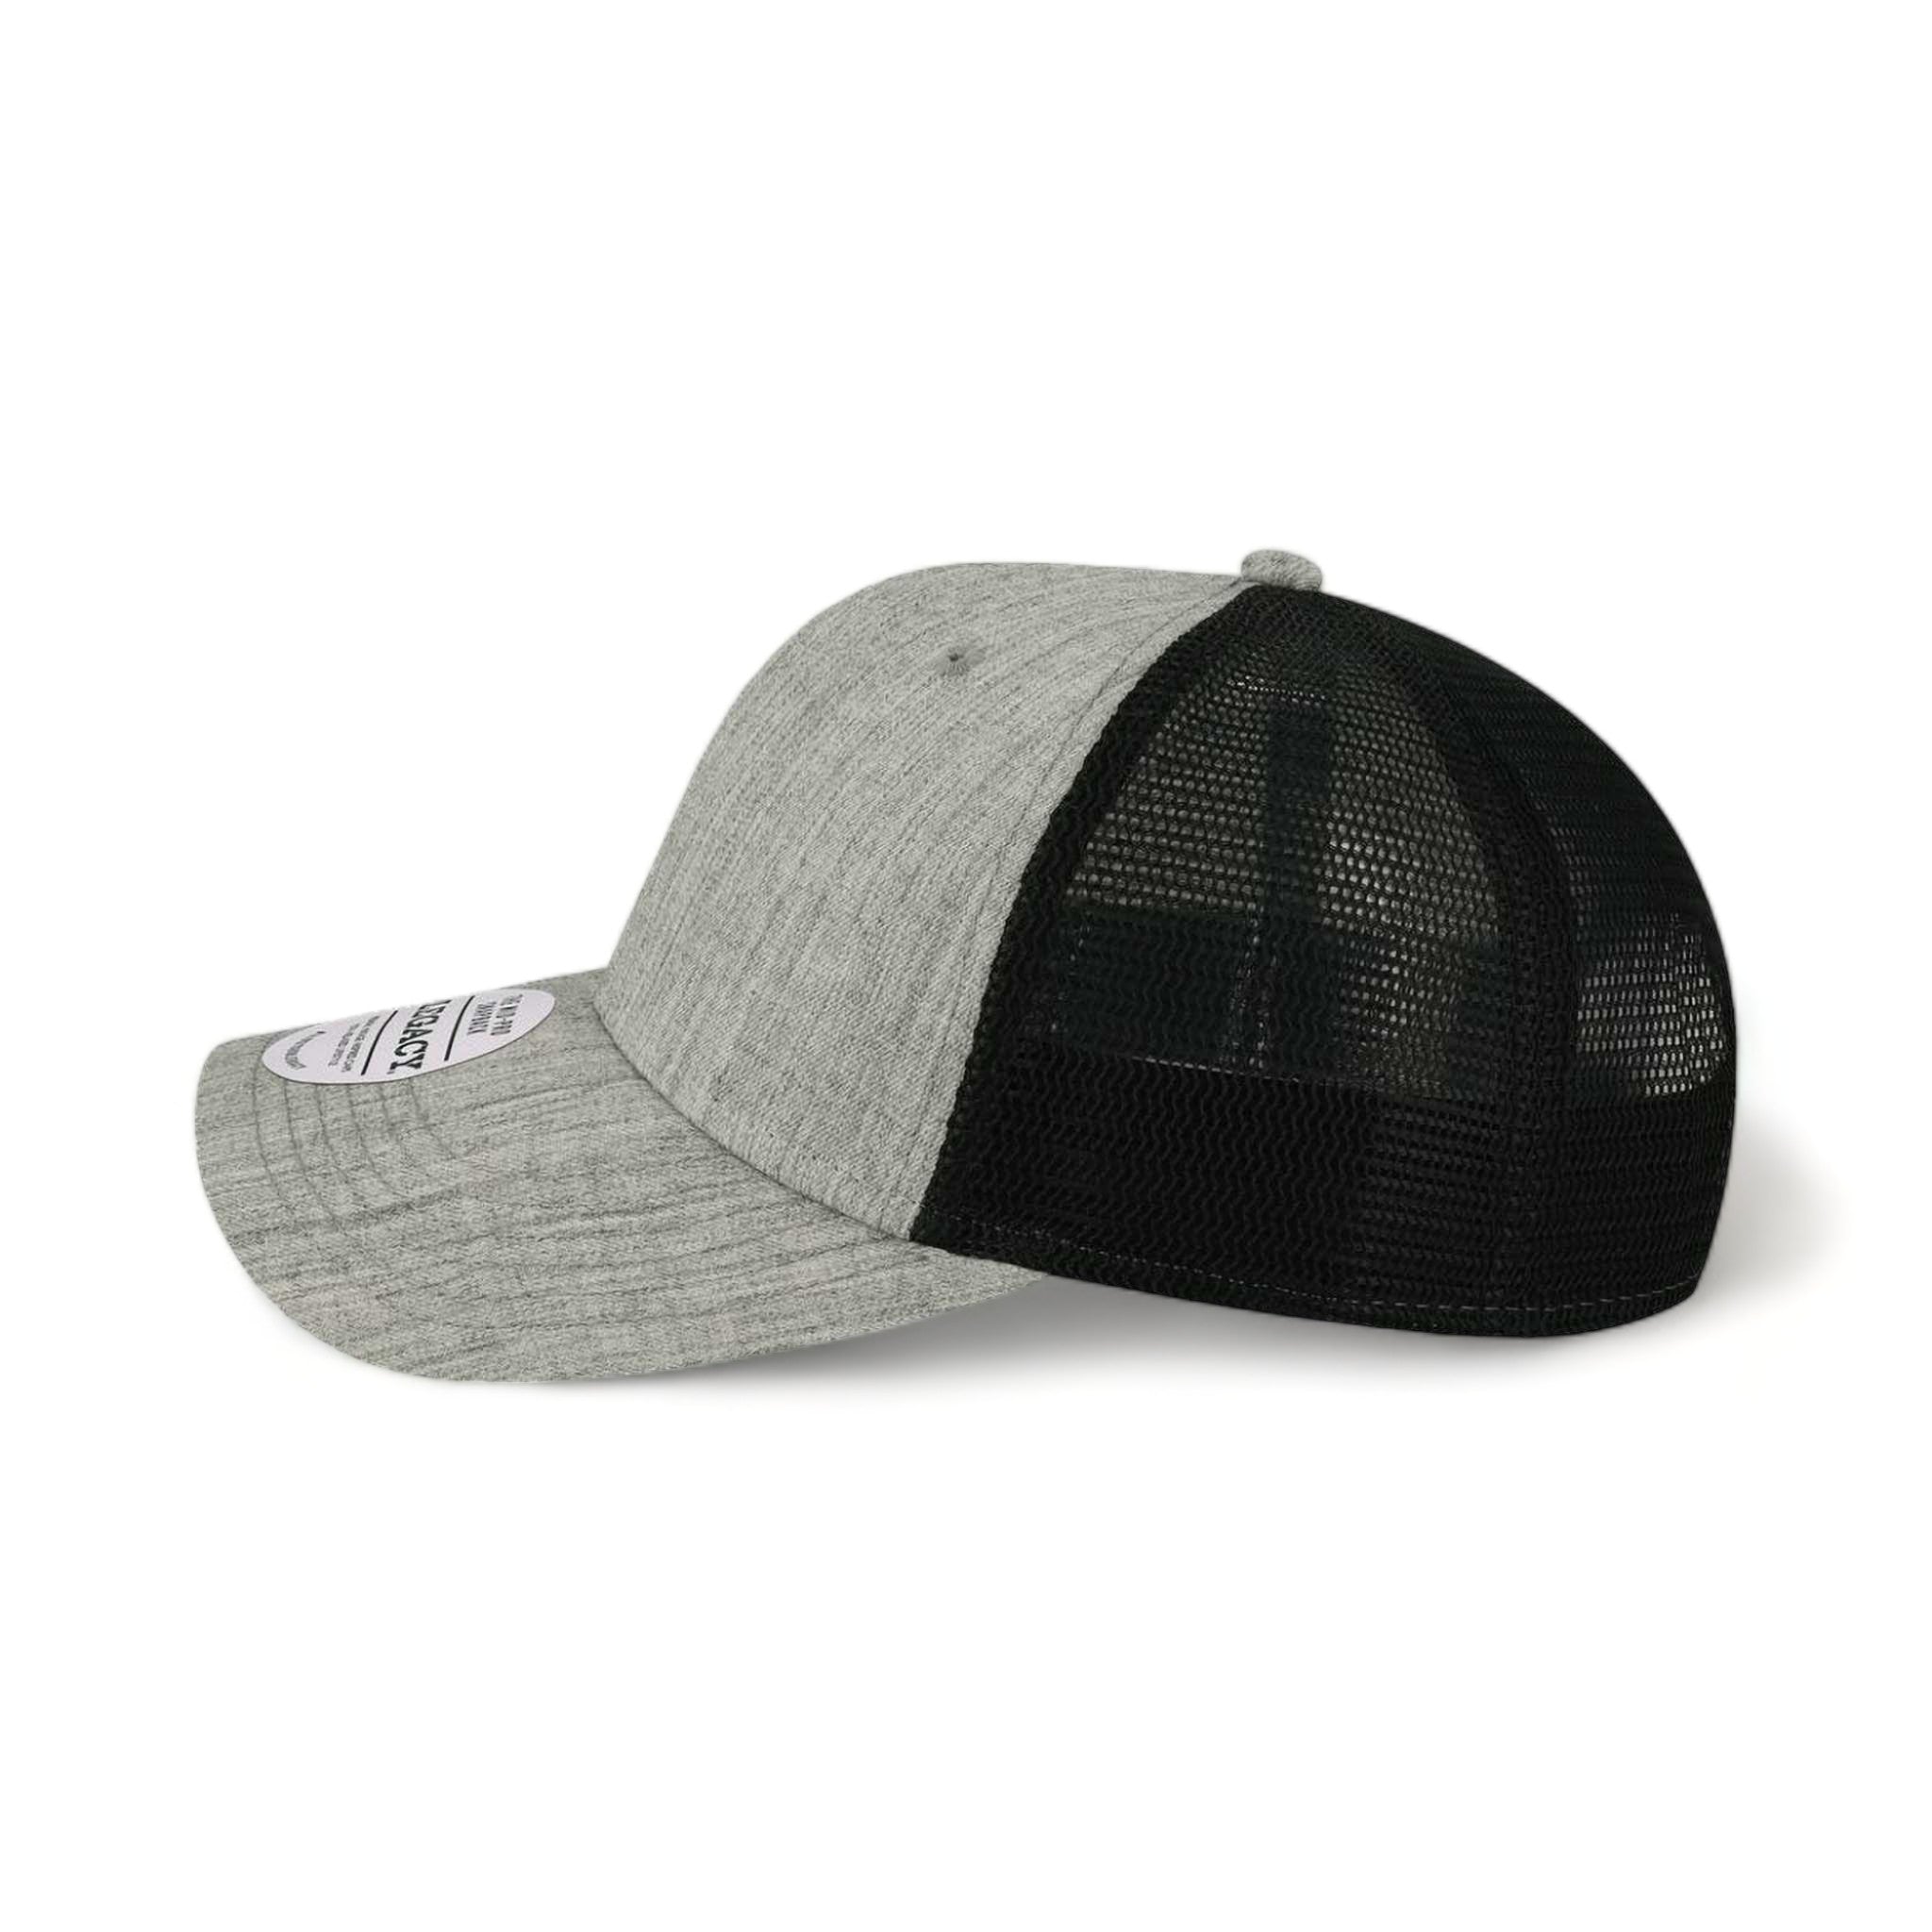 Side view of LEGACY MPS custom hat in mélange grey and black